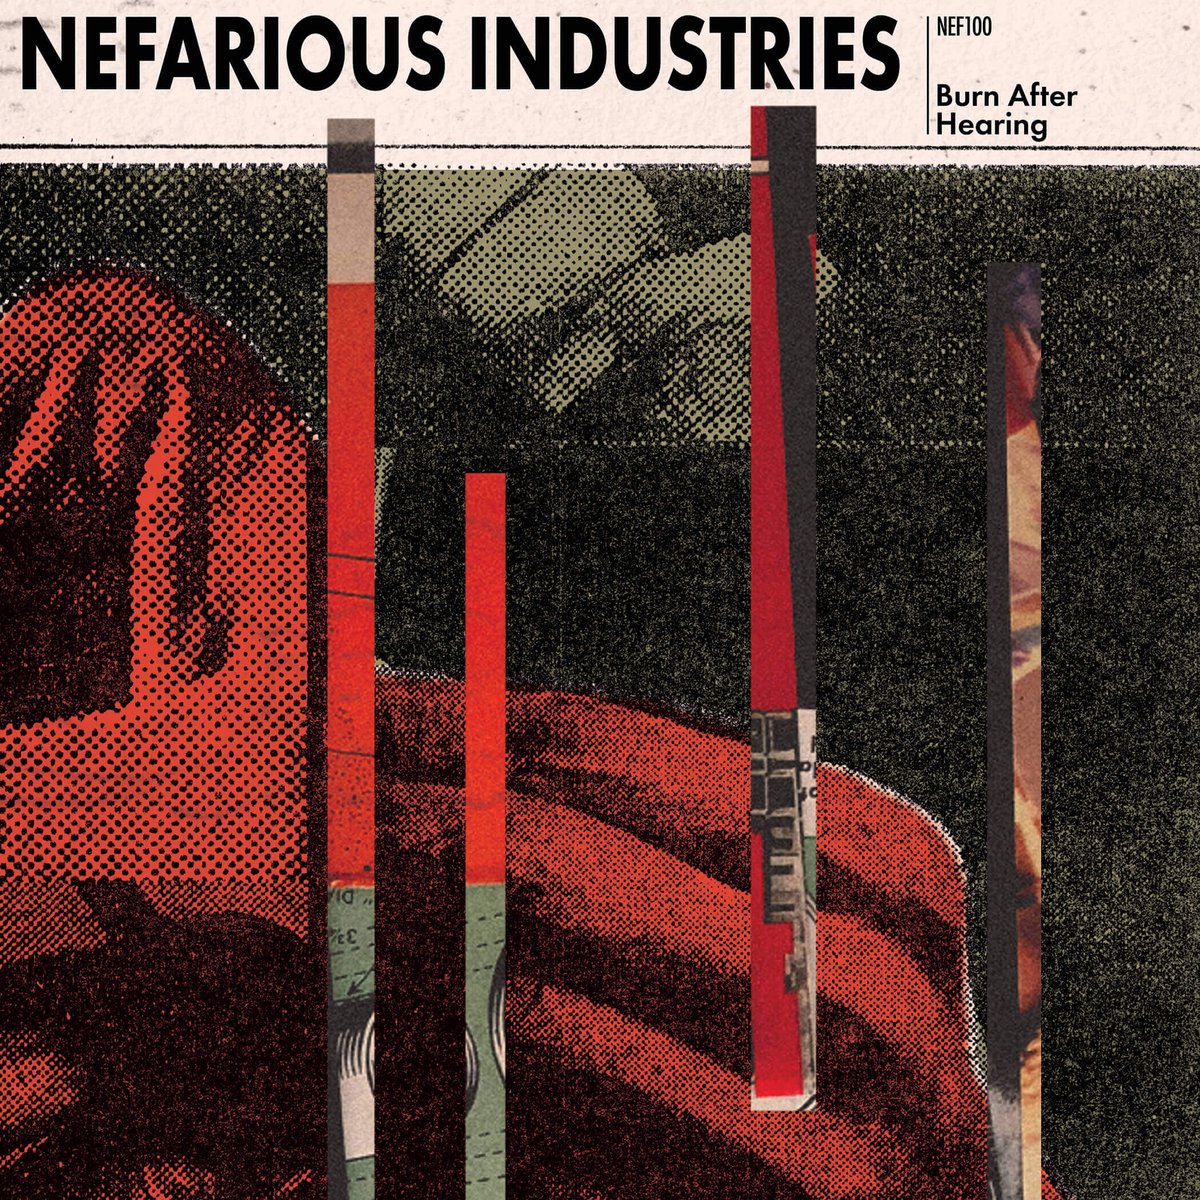 NEF100: Burn After Hearing – Nefarious Industries Presents Compilation LP With Tracks From Fourteen Flagship Label Artists; Preorders + New Tracks From EL DRUGSTORE And RISK RELAY Posted earsplitcompound.com/nef100-burn-af… @NefariousInd @riskrelay @GRIDFAILURE @fyourbirthday @cinemacinema